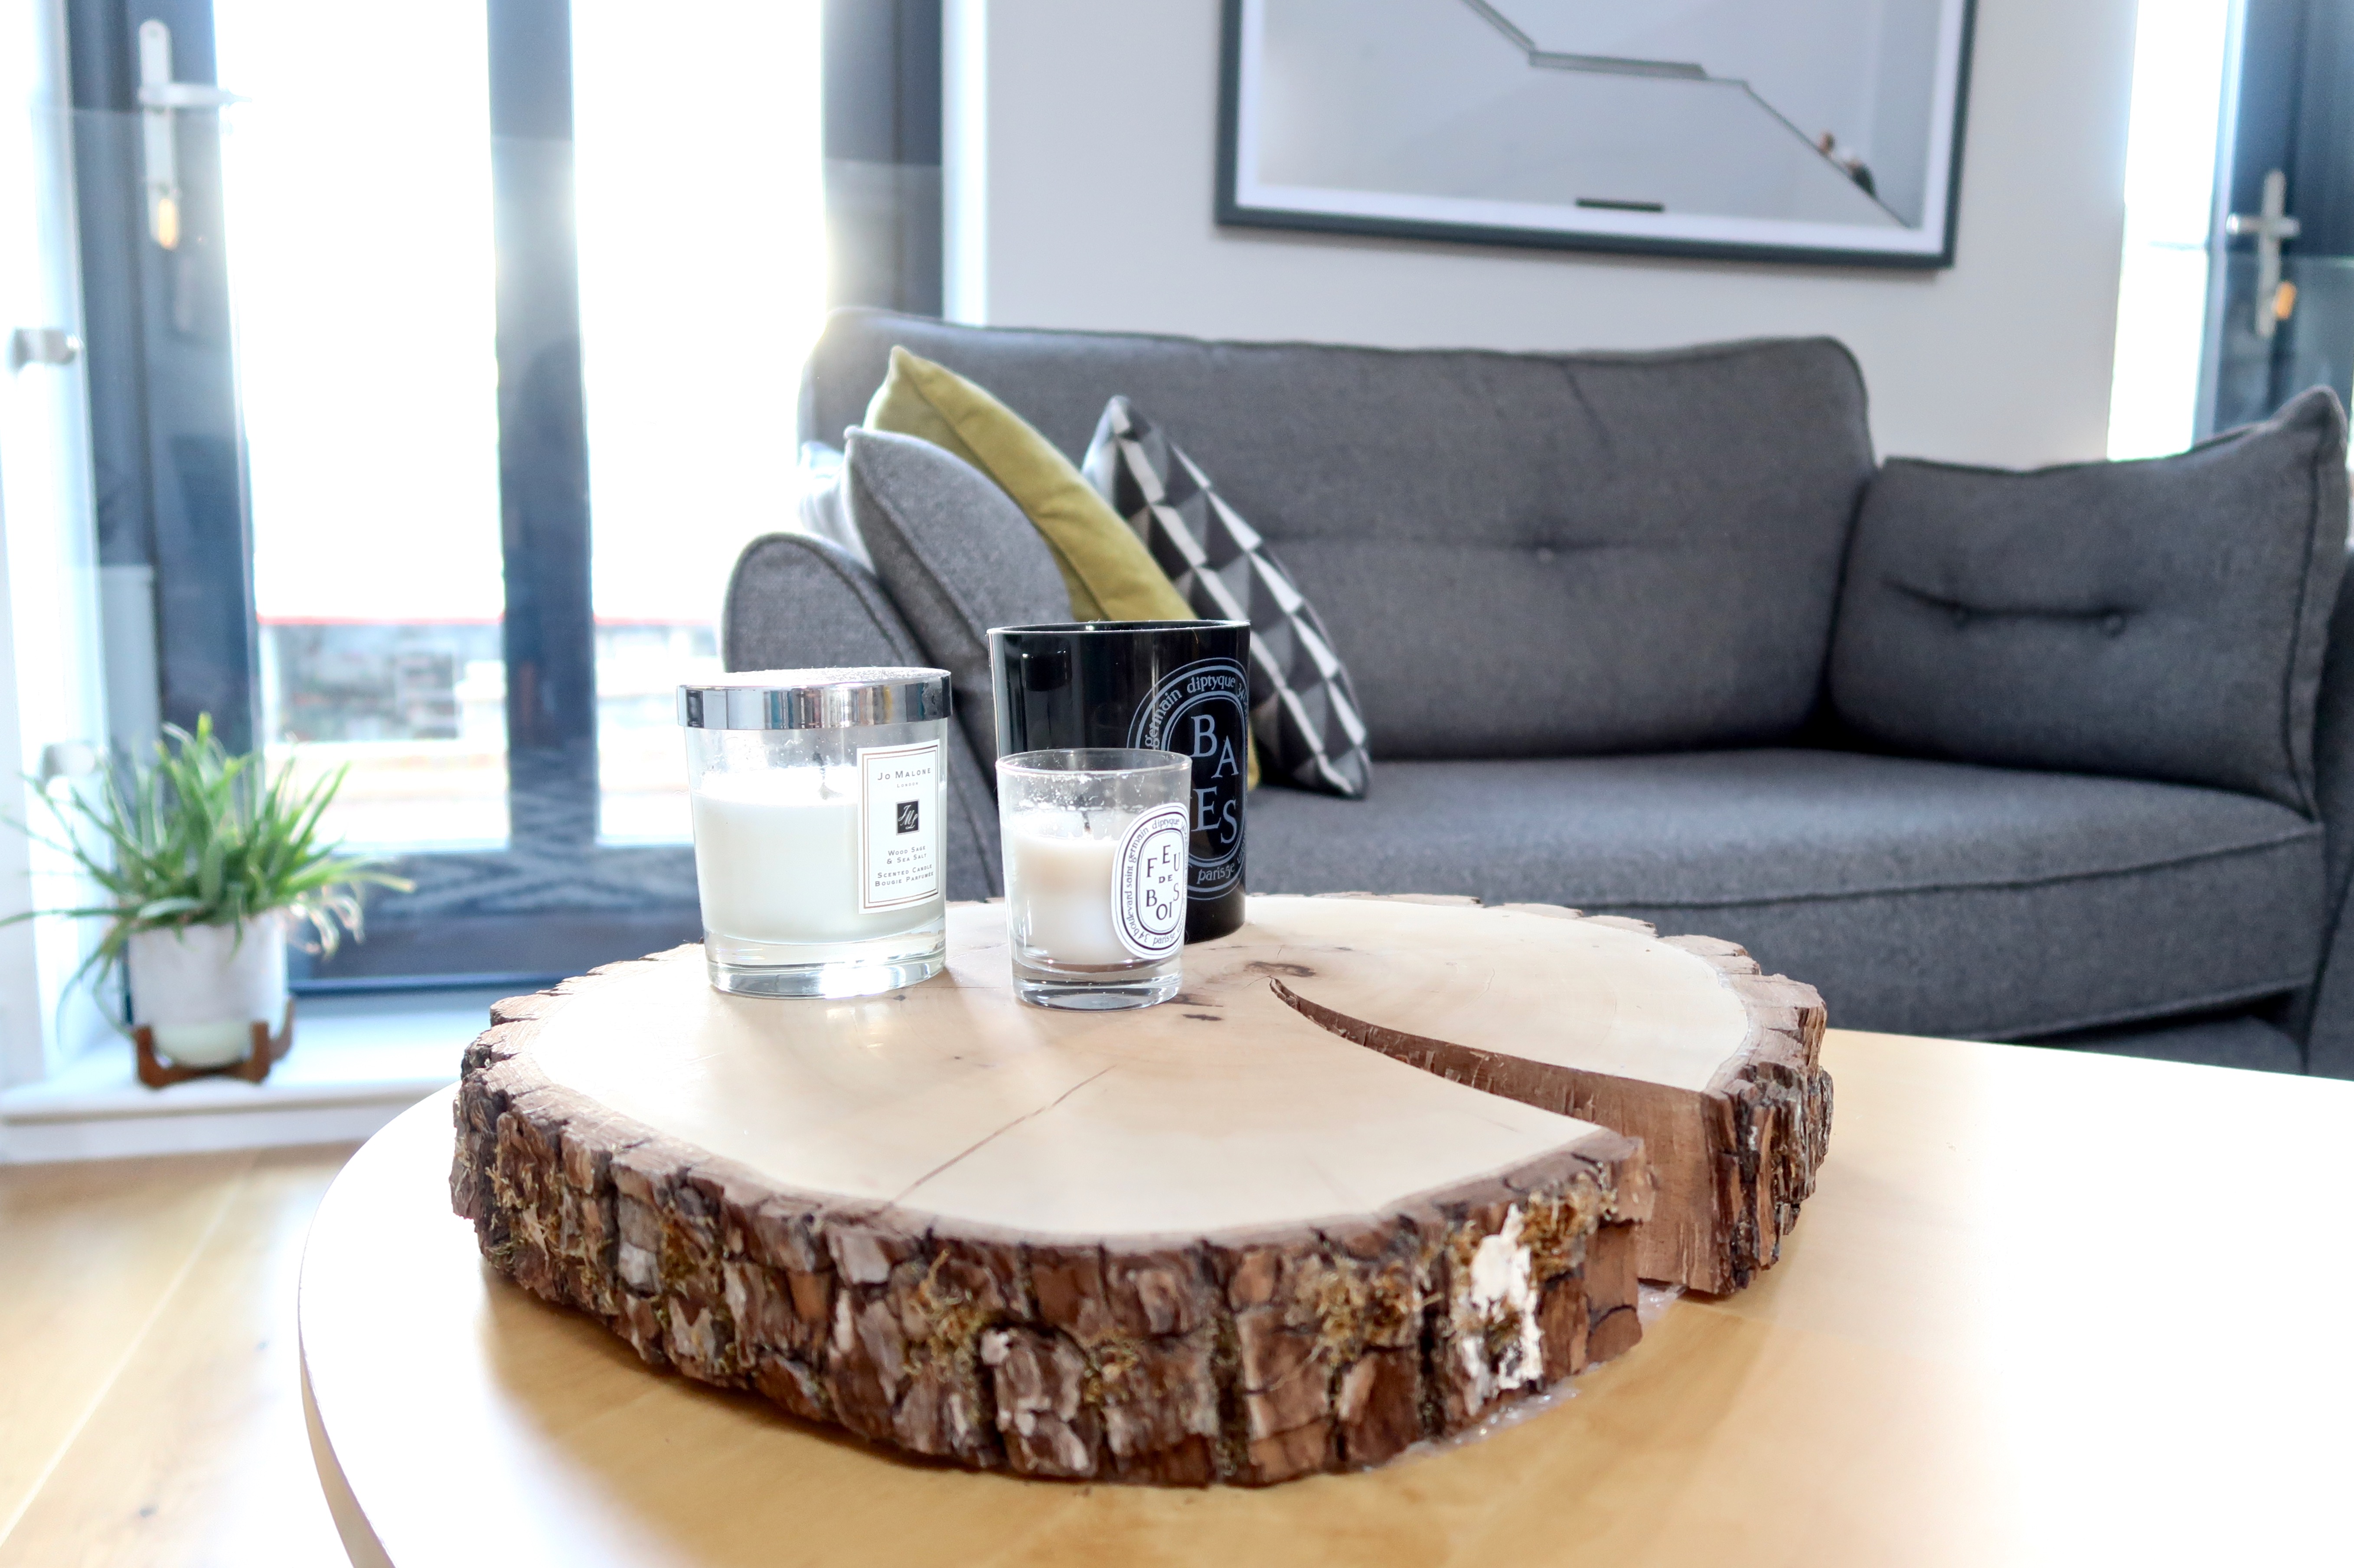 Ikea coffee table, Jo Malone Diptyque candles, wood slice